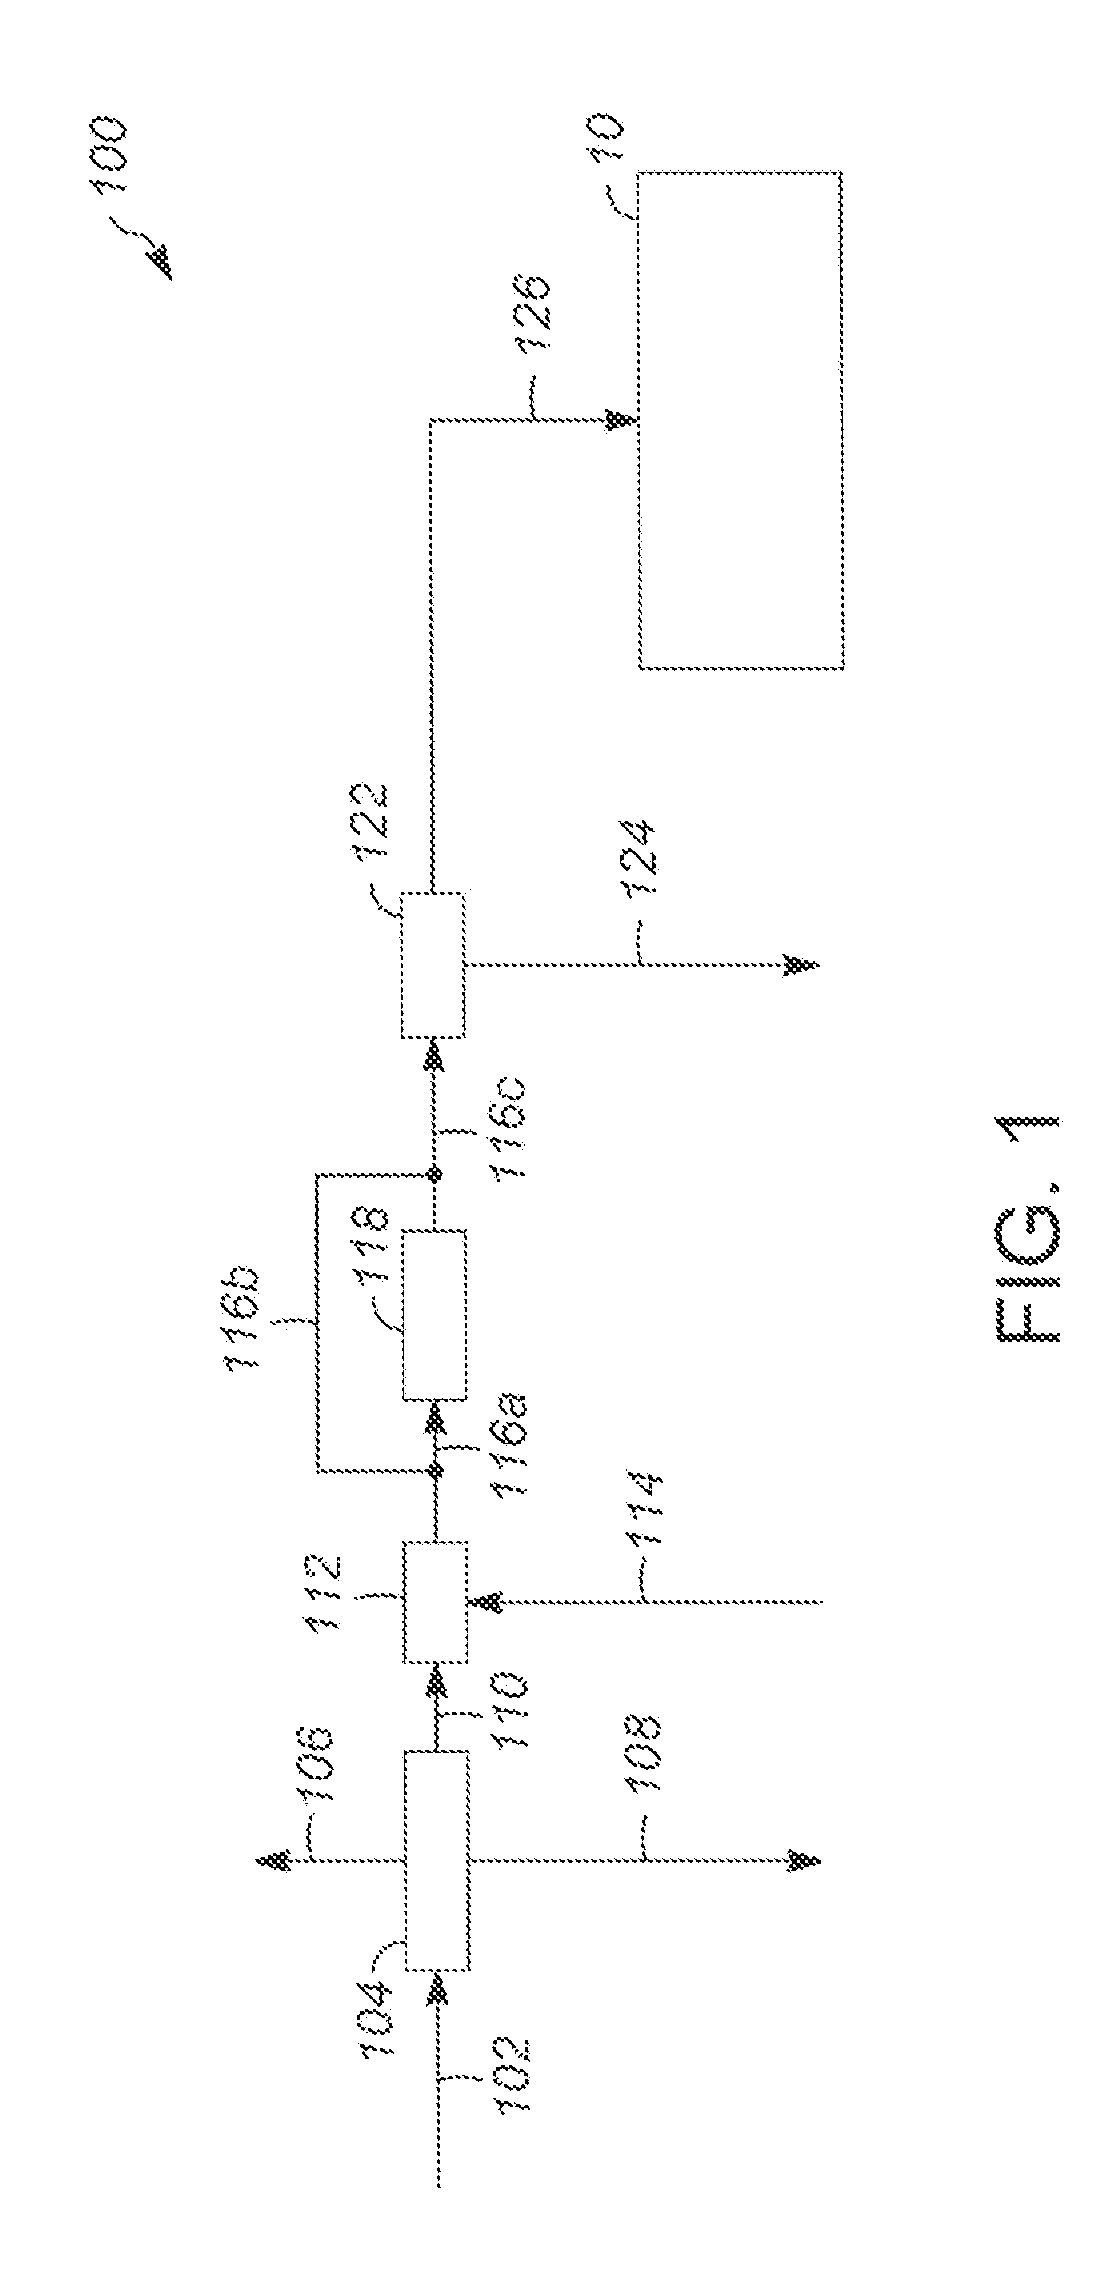 Methods for producing linear alkylbenzenes, paraffins, and olefins from natural oils and kerosene